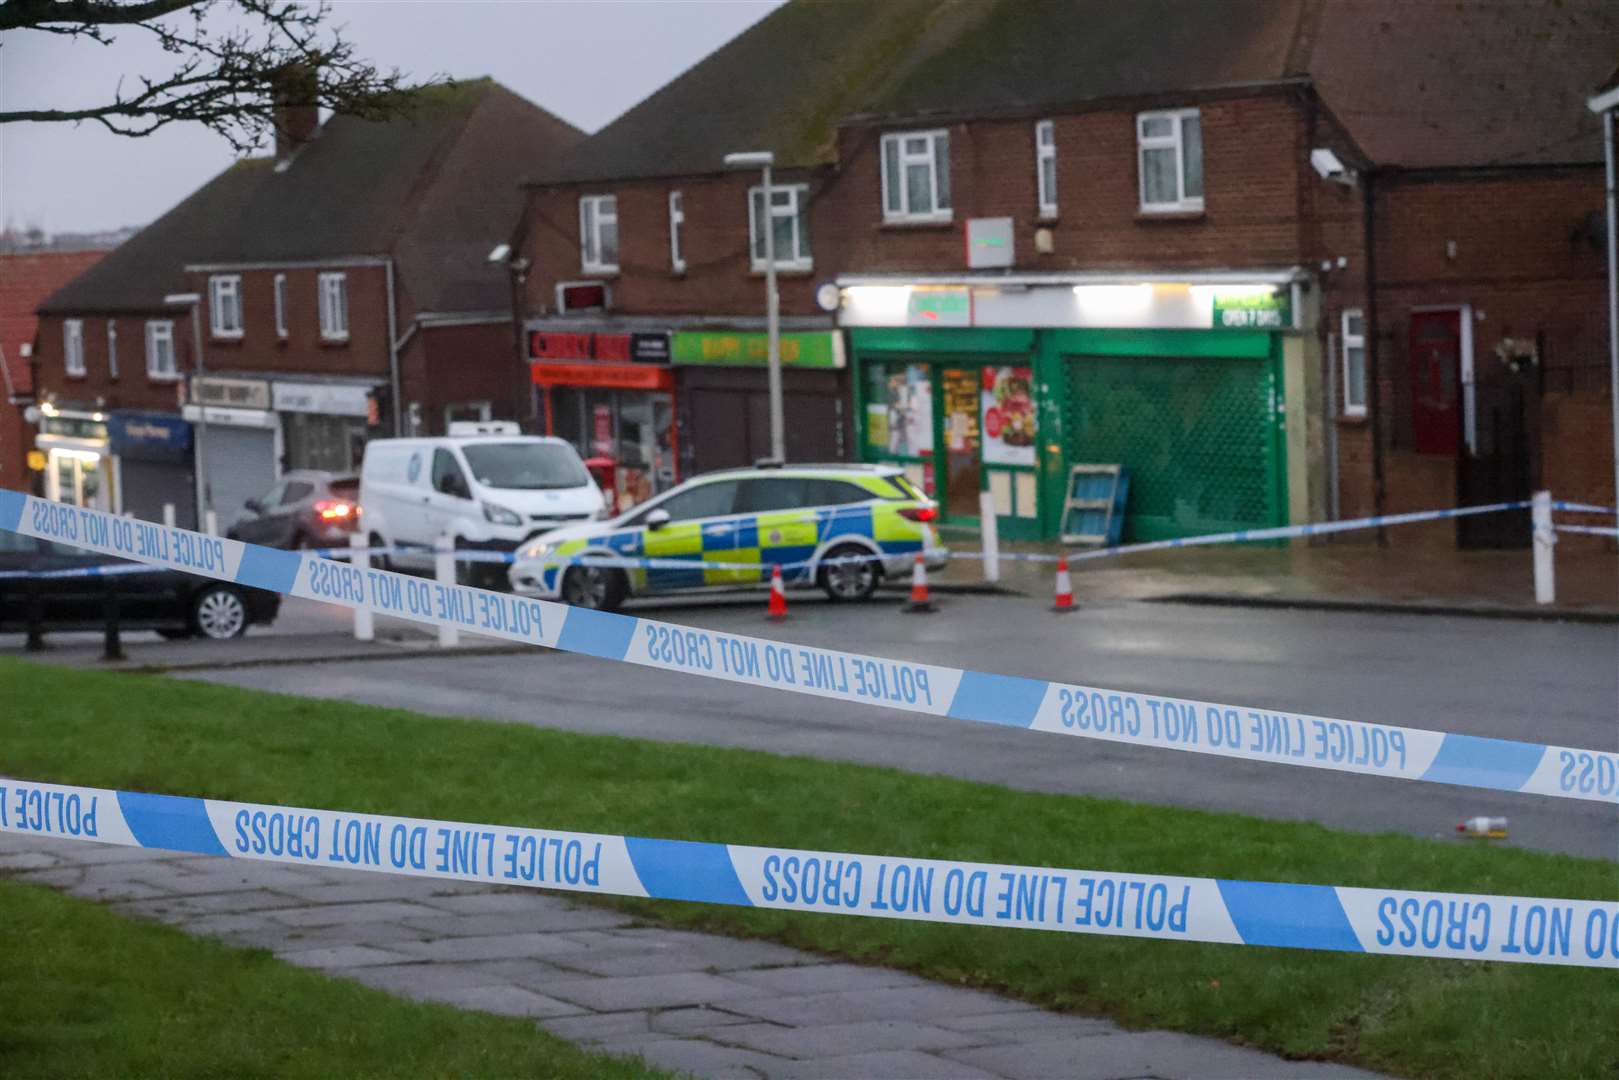 Part of Wayfield Road, Chatham, has been cordoned off following the brawl. Photo: UKNiP